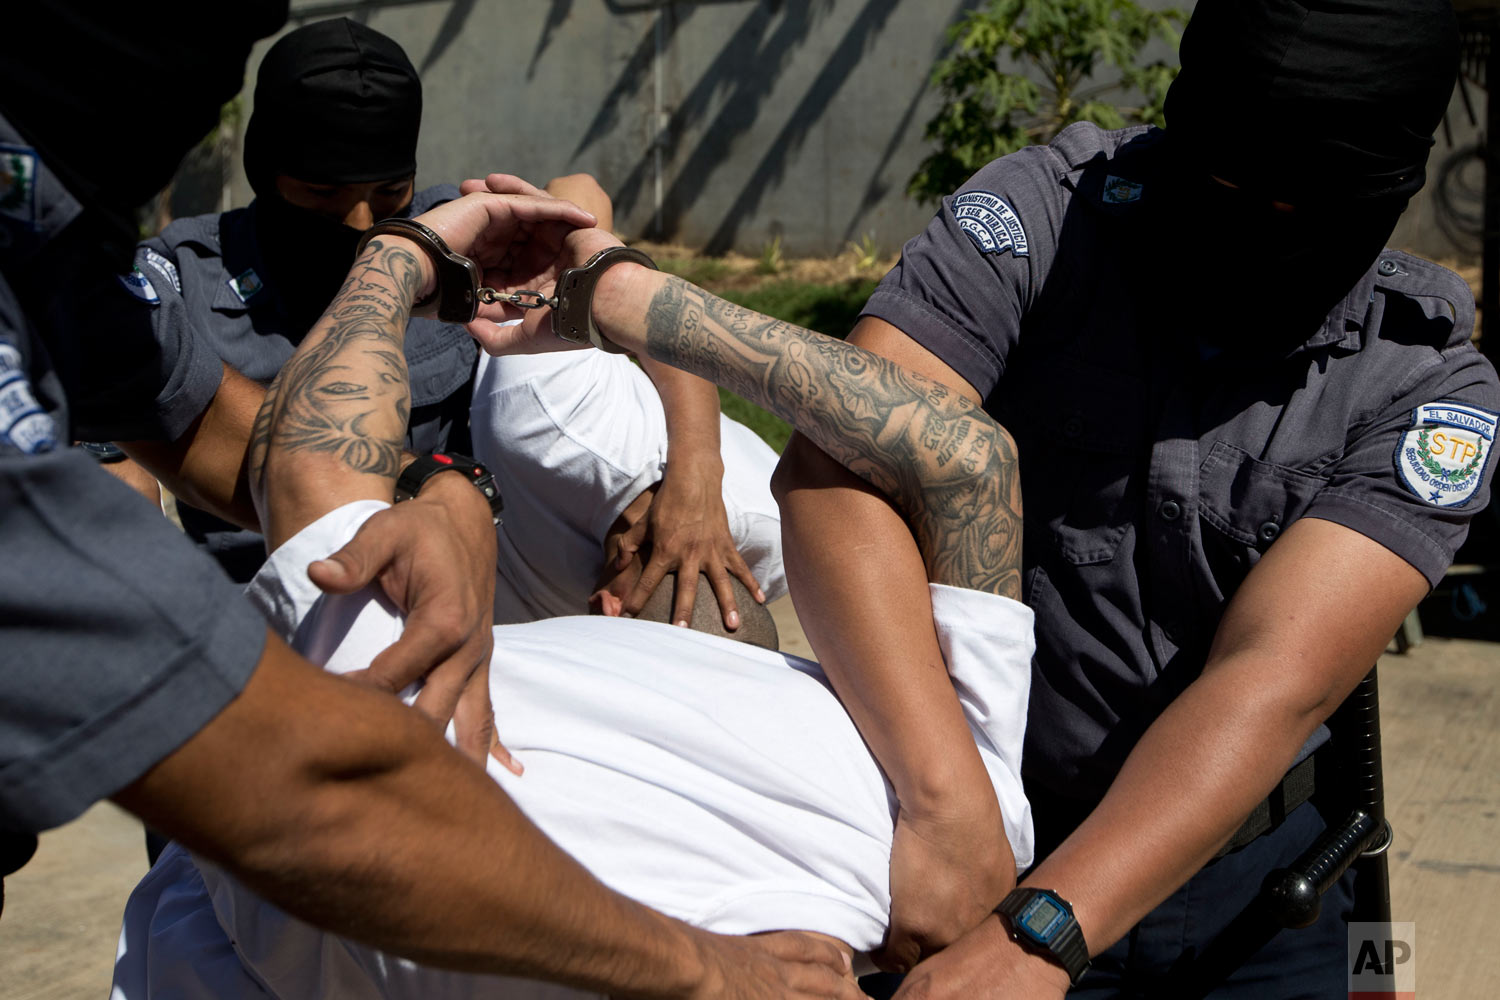  Jailed men identified by authorities as members of the Mara Salvatrucha gang are escorted in handcuffs by masked prison guards to the Zacatras high security prison where they will await trials for murder in Zacatecoluca, El Salvador, Jan. 31, 2019. 